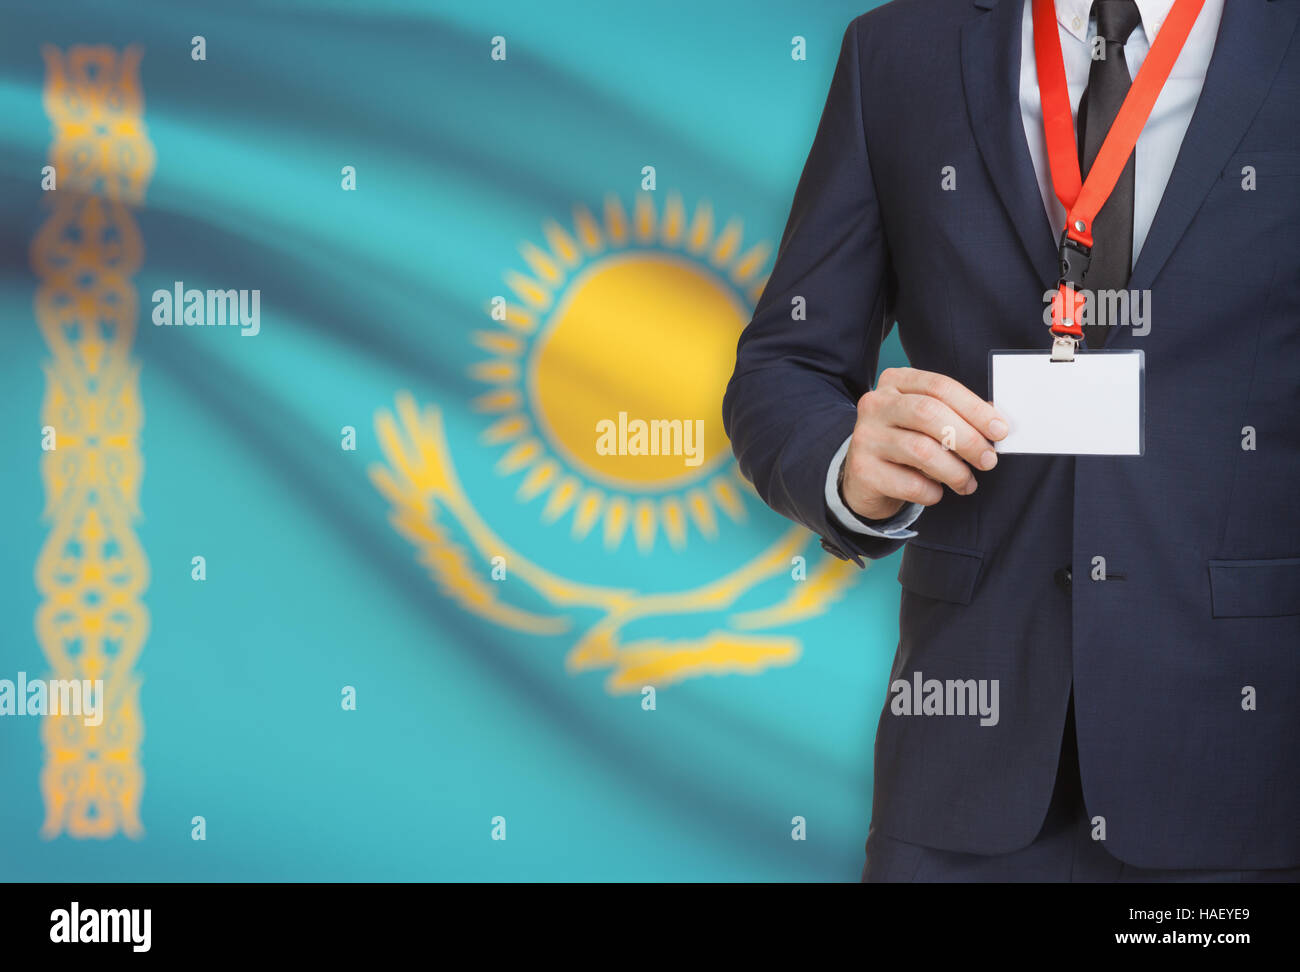 Businessman holding name card badge on a lanyard with a flag on background - Kazakhstan Stock Photo